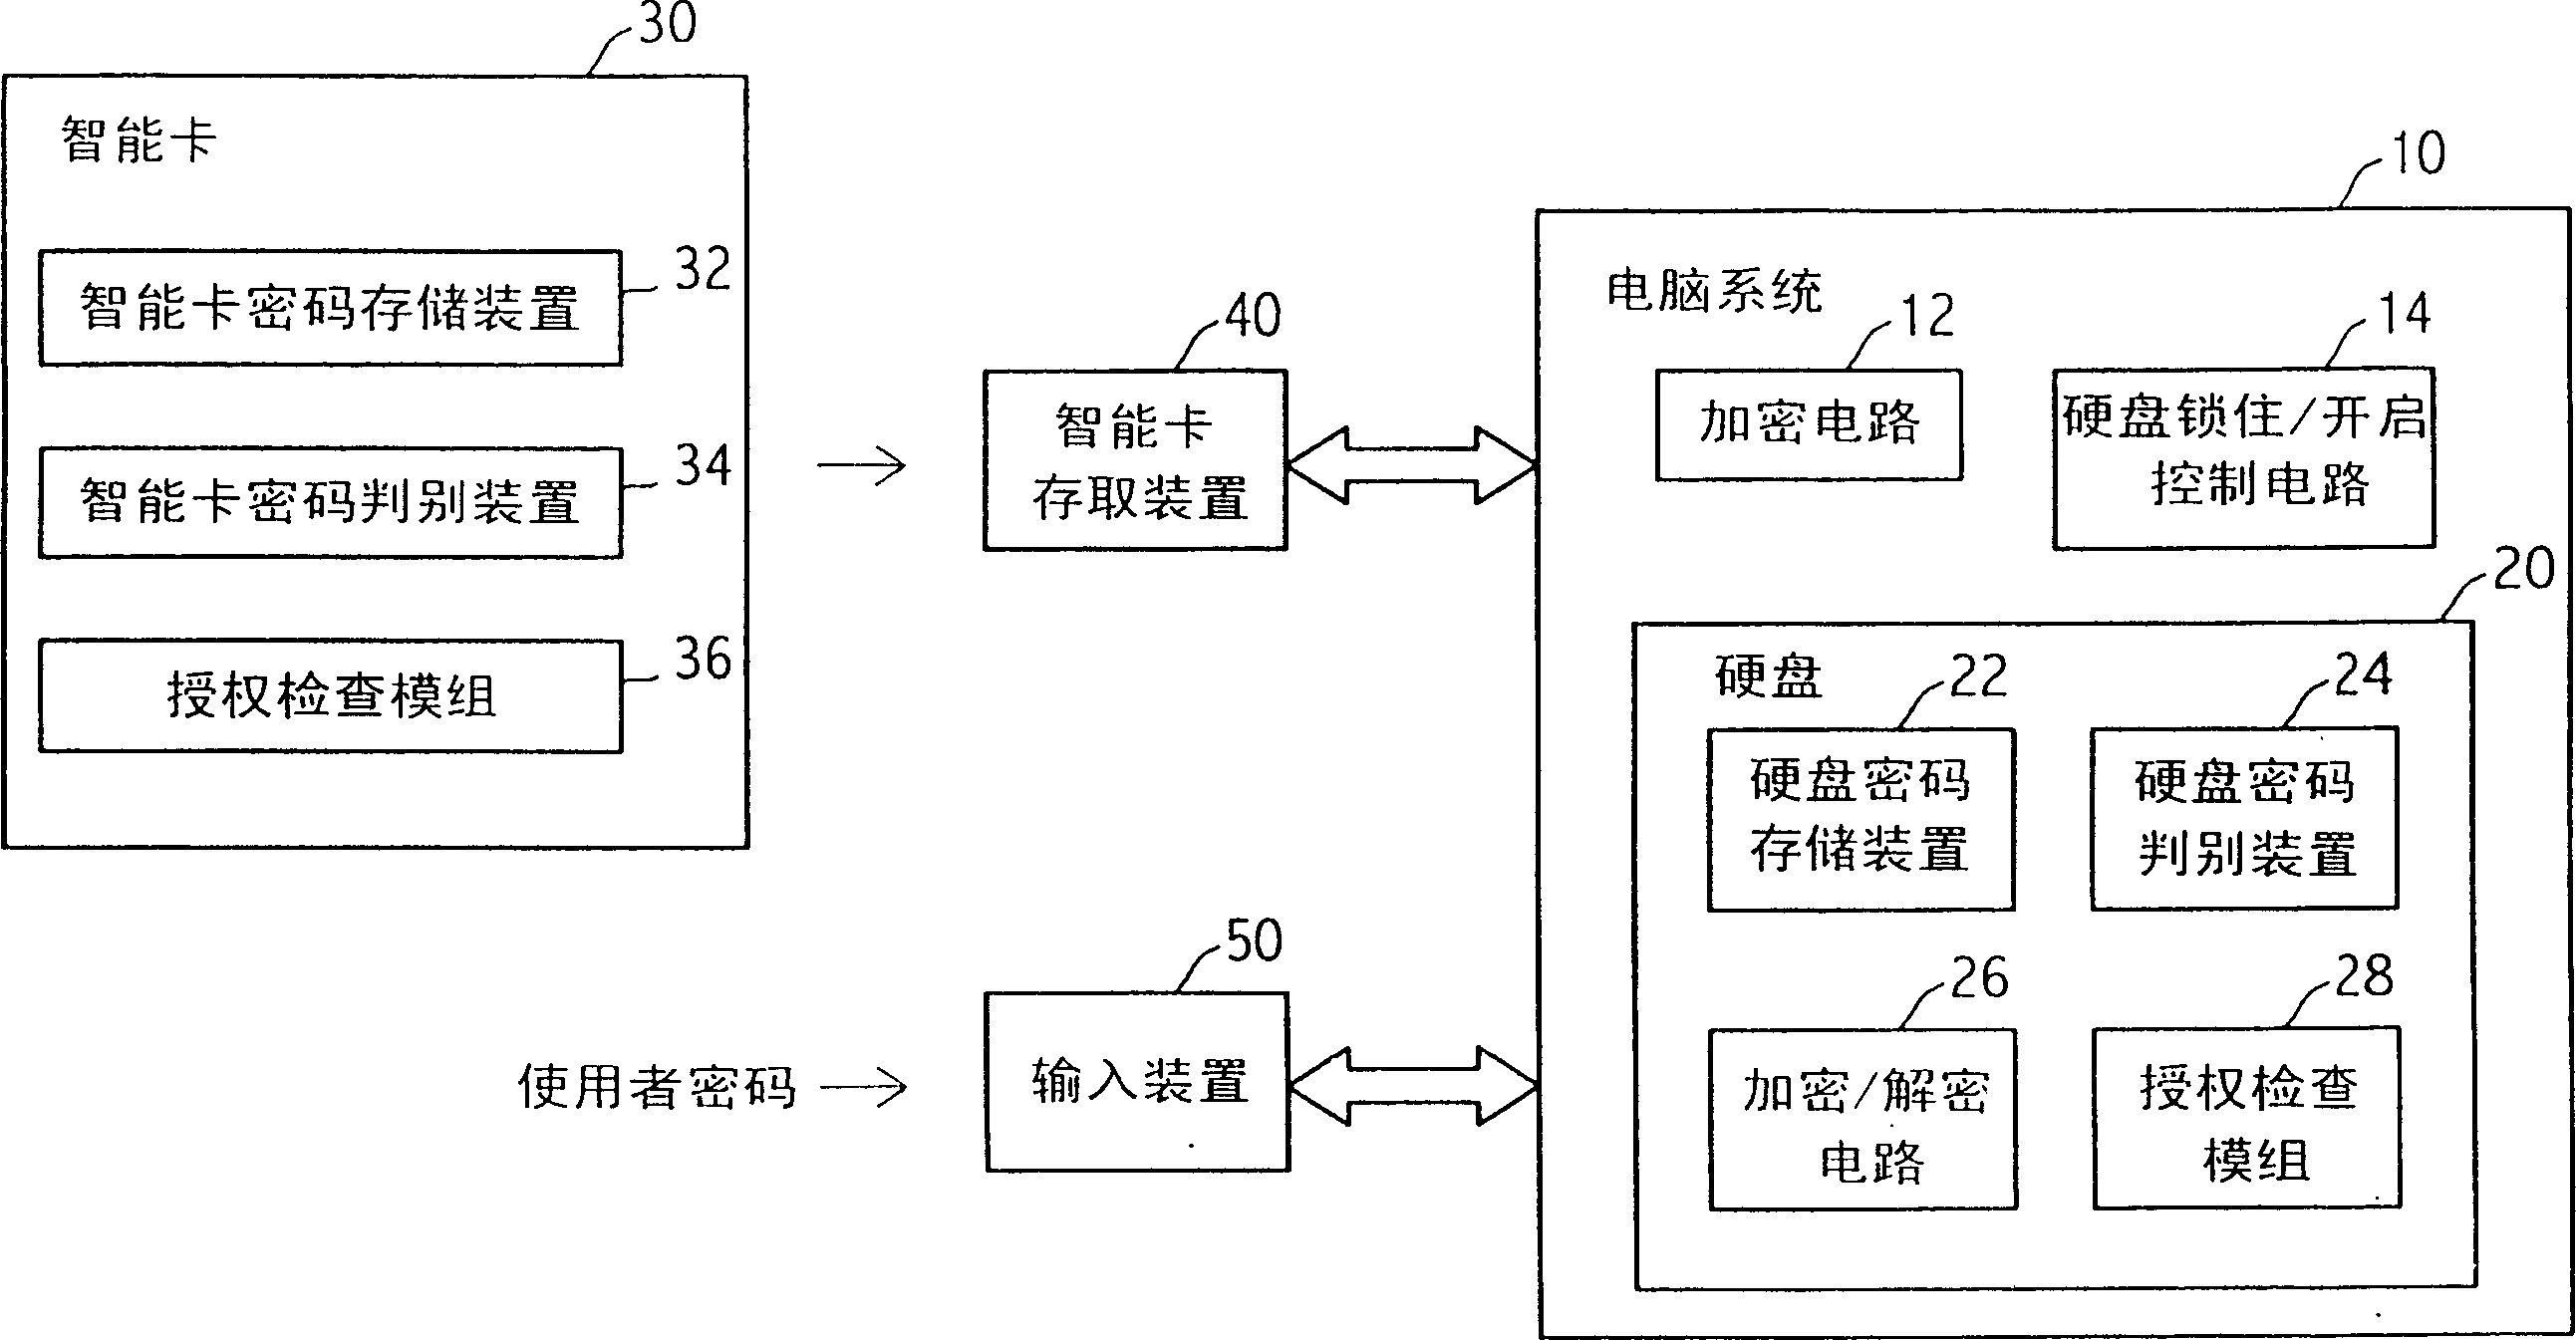 Method and system for protecting hard disk of computer